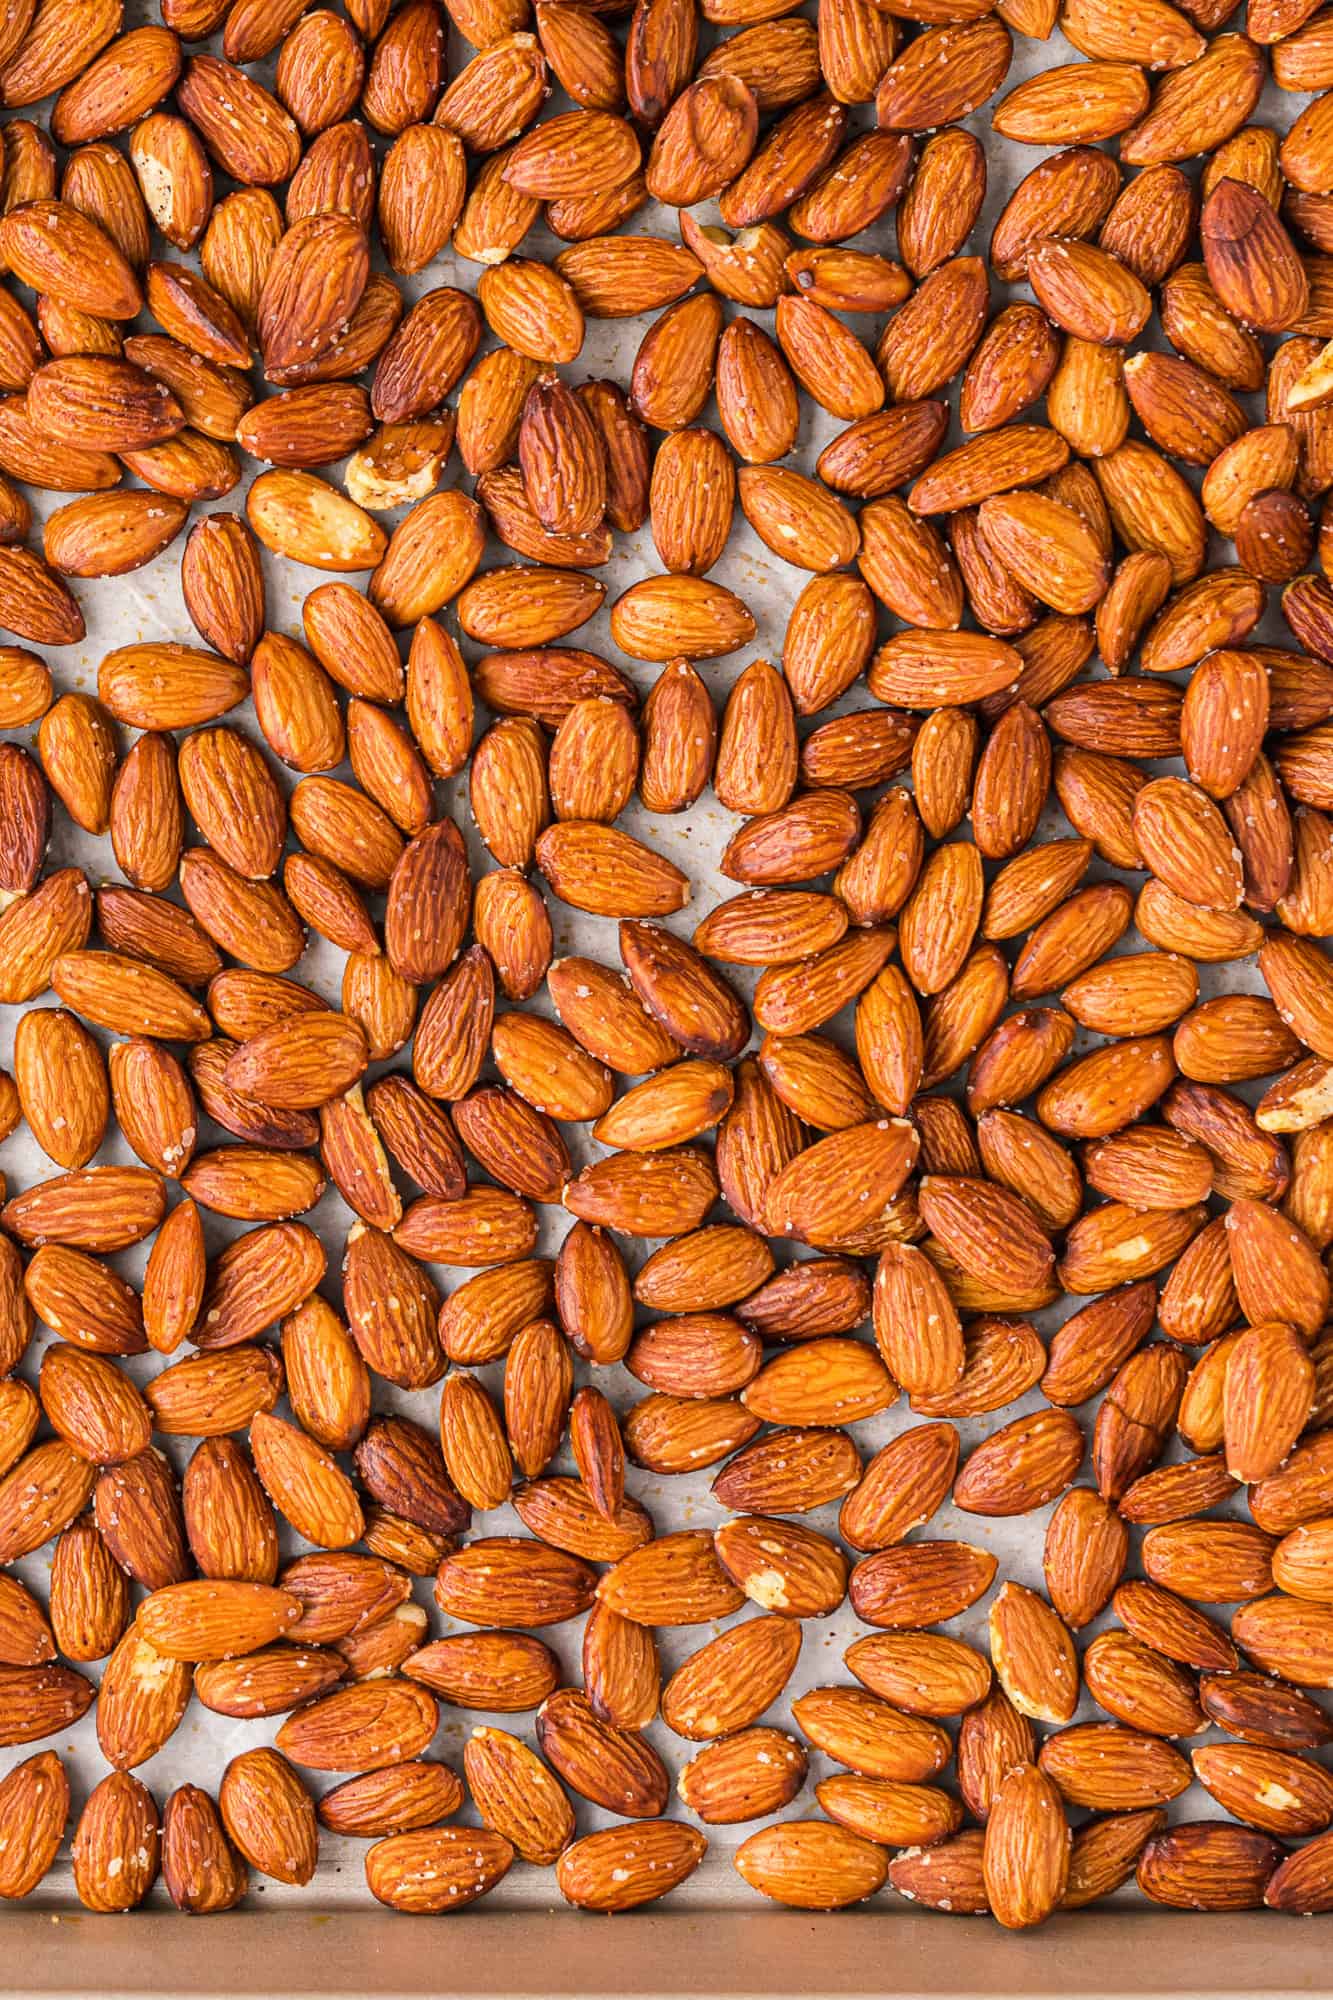 Close up of almonds filling frame of photo.